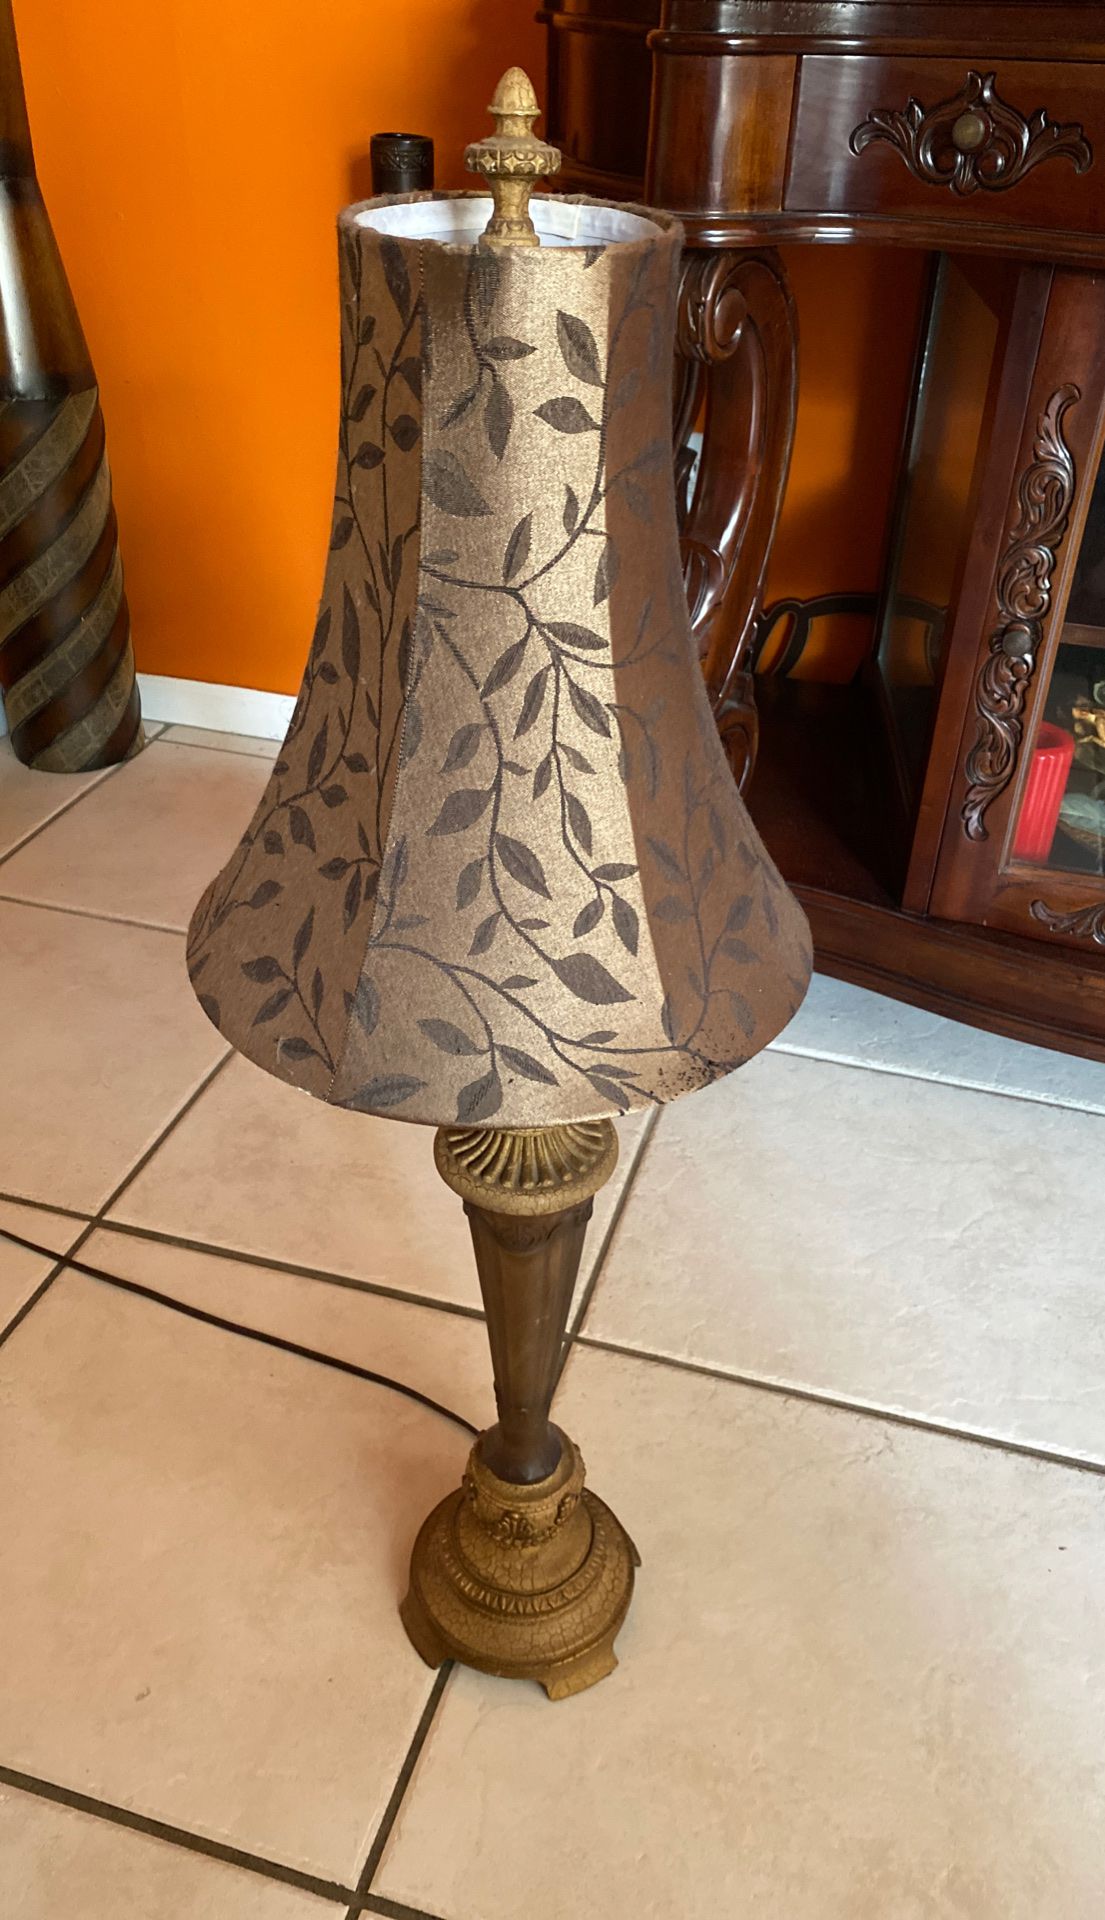 Antique lamp for sale works perfectly